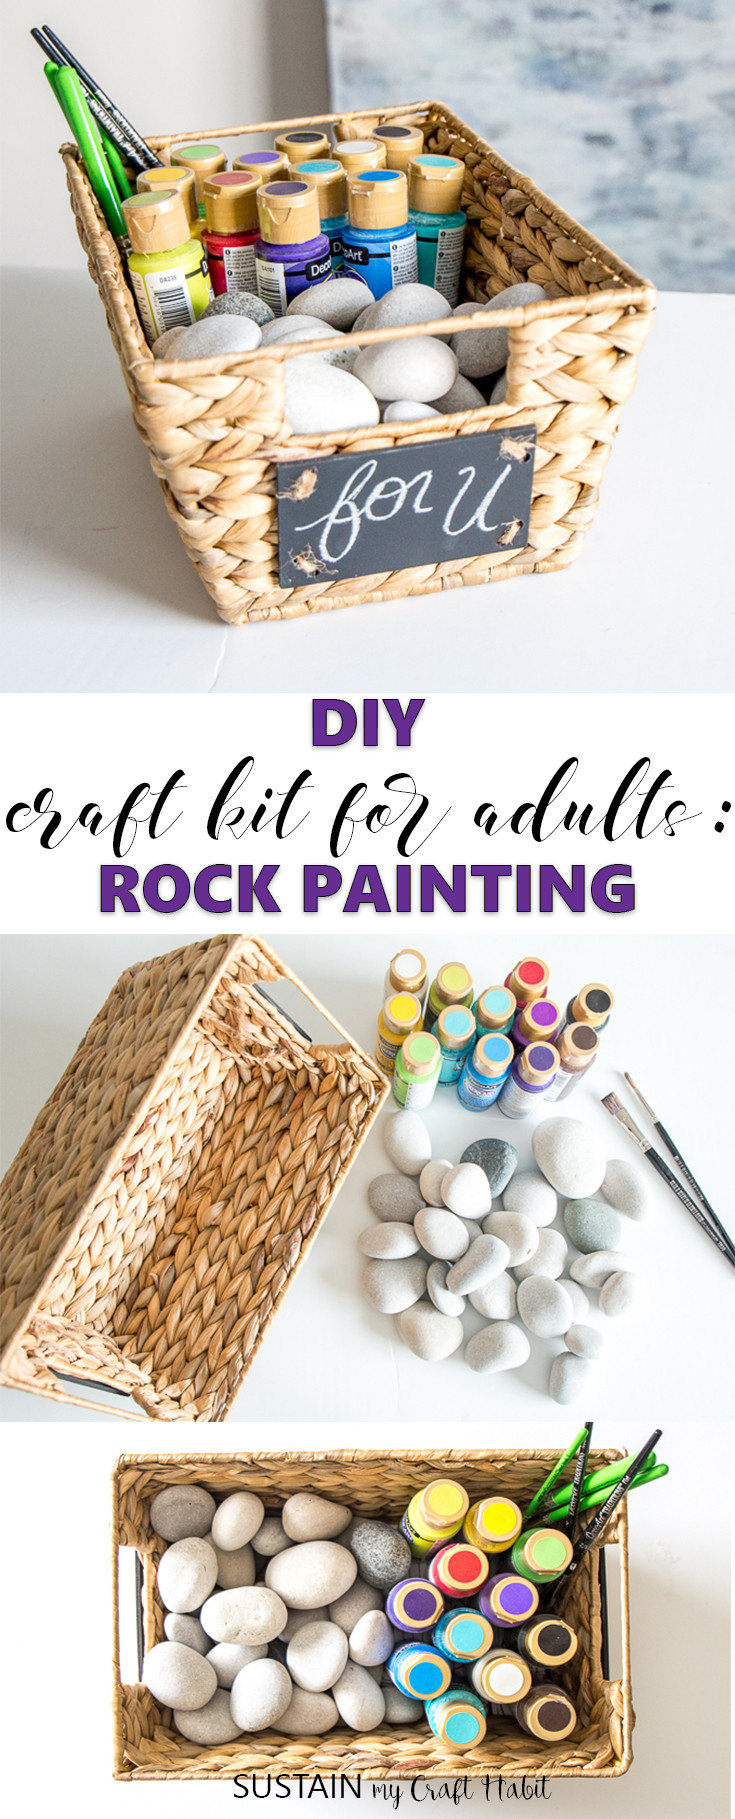 Painting Crafts For Adults
 Make your Own Craft Kit for Adults Rock Painting